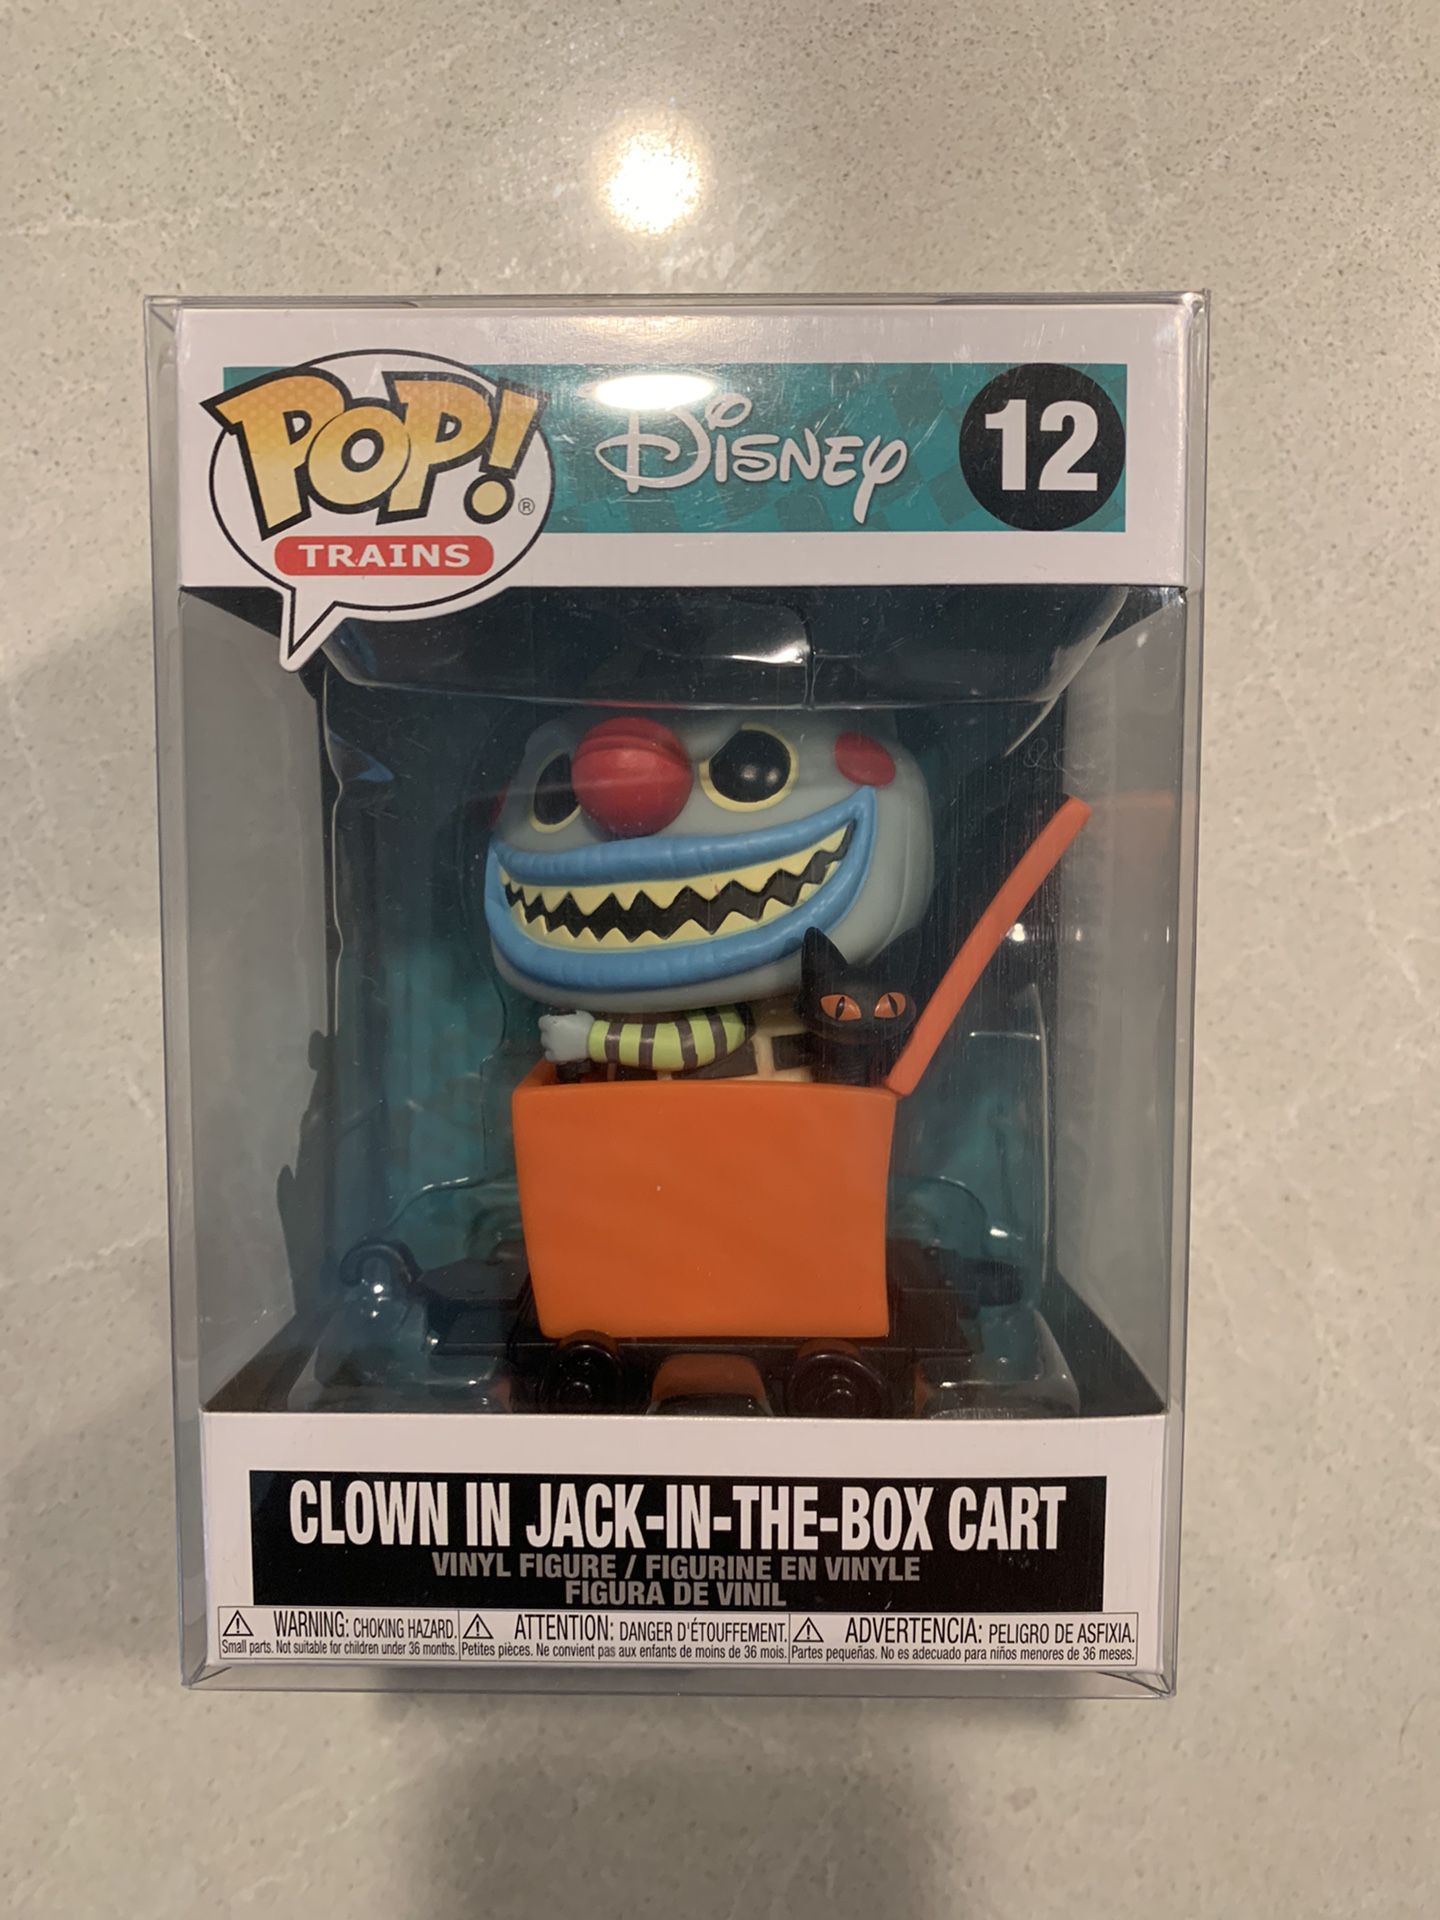 Clown Jack In The Box Cart Funko Pop *MINT IN HAND* Shop Exclusive Disney Nightmare Before Christmas Train 12 with protector NBC